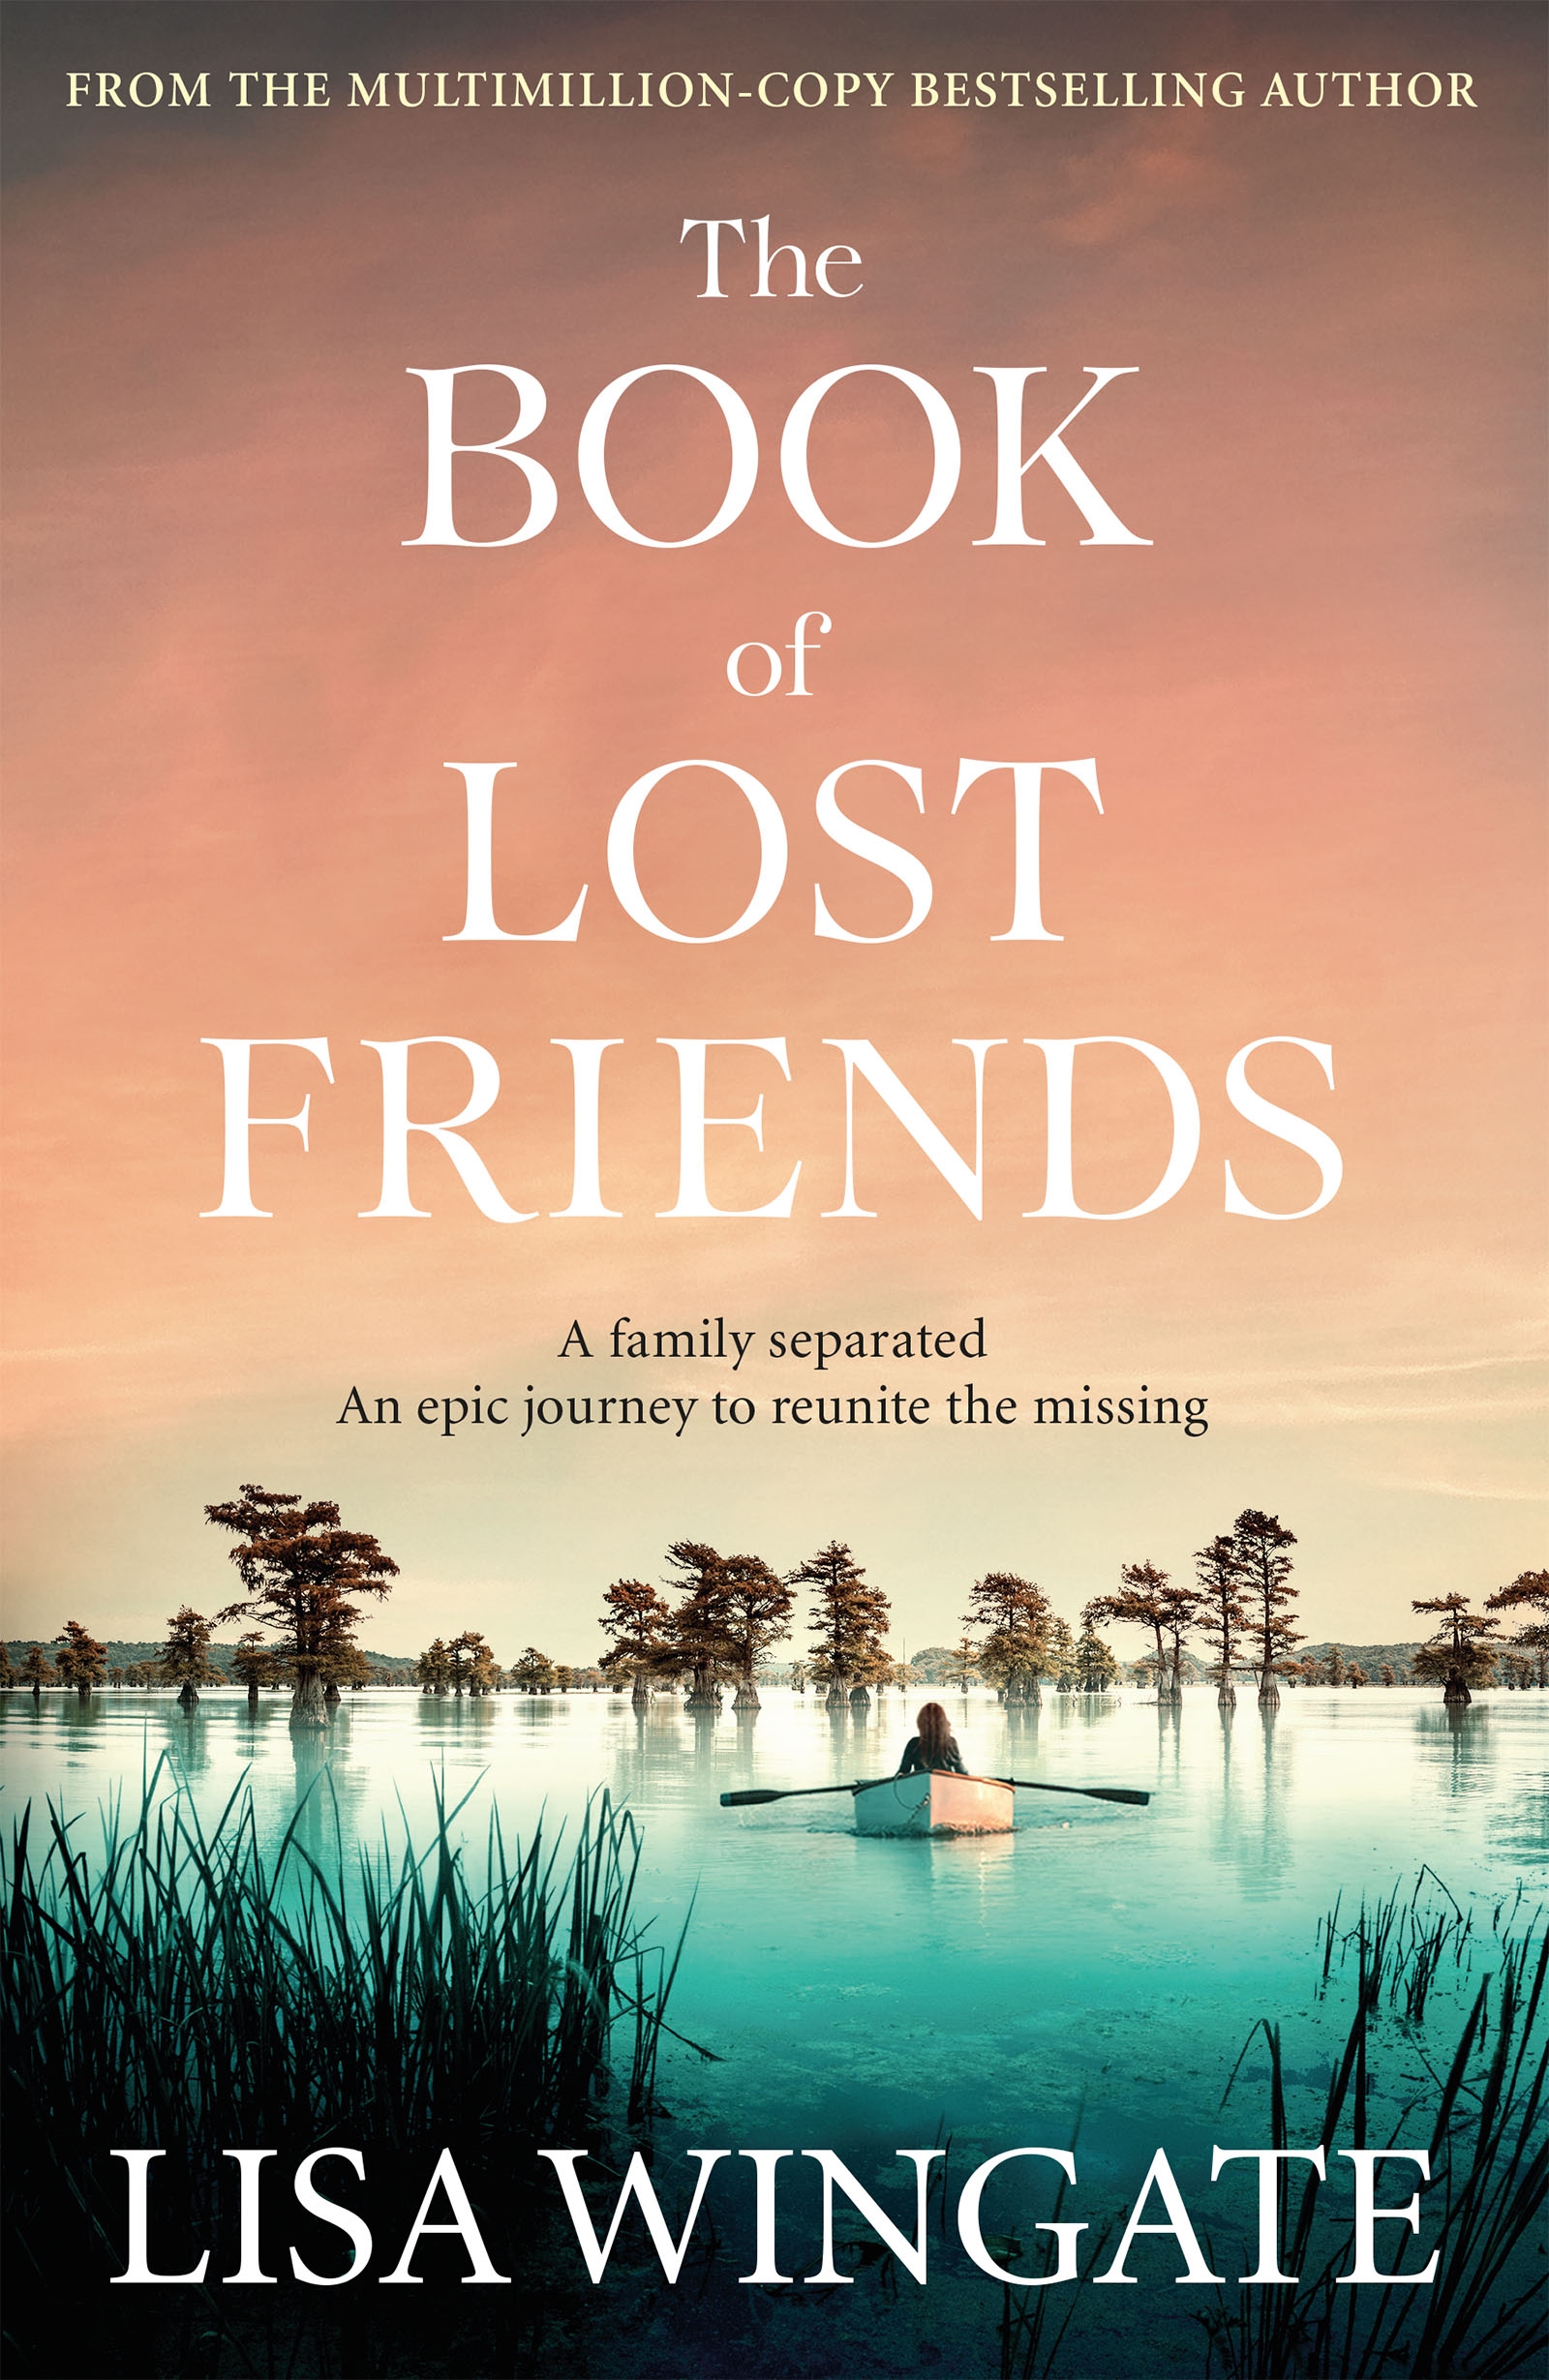 Download Book The book of lost friends No Survey